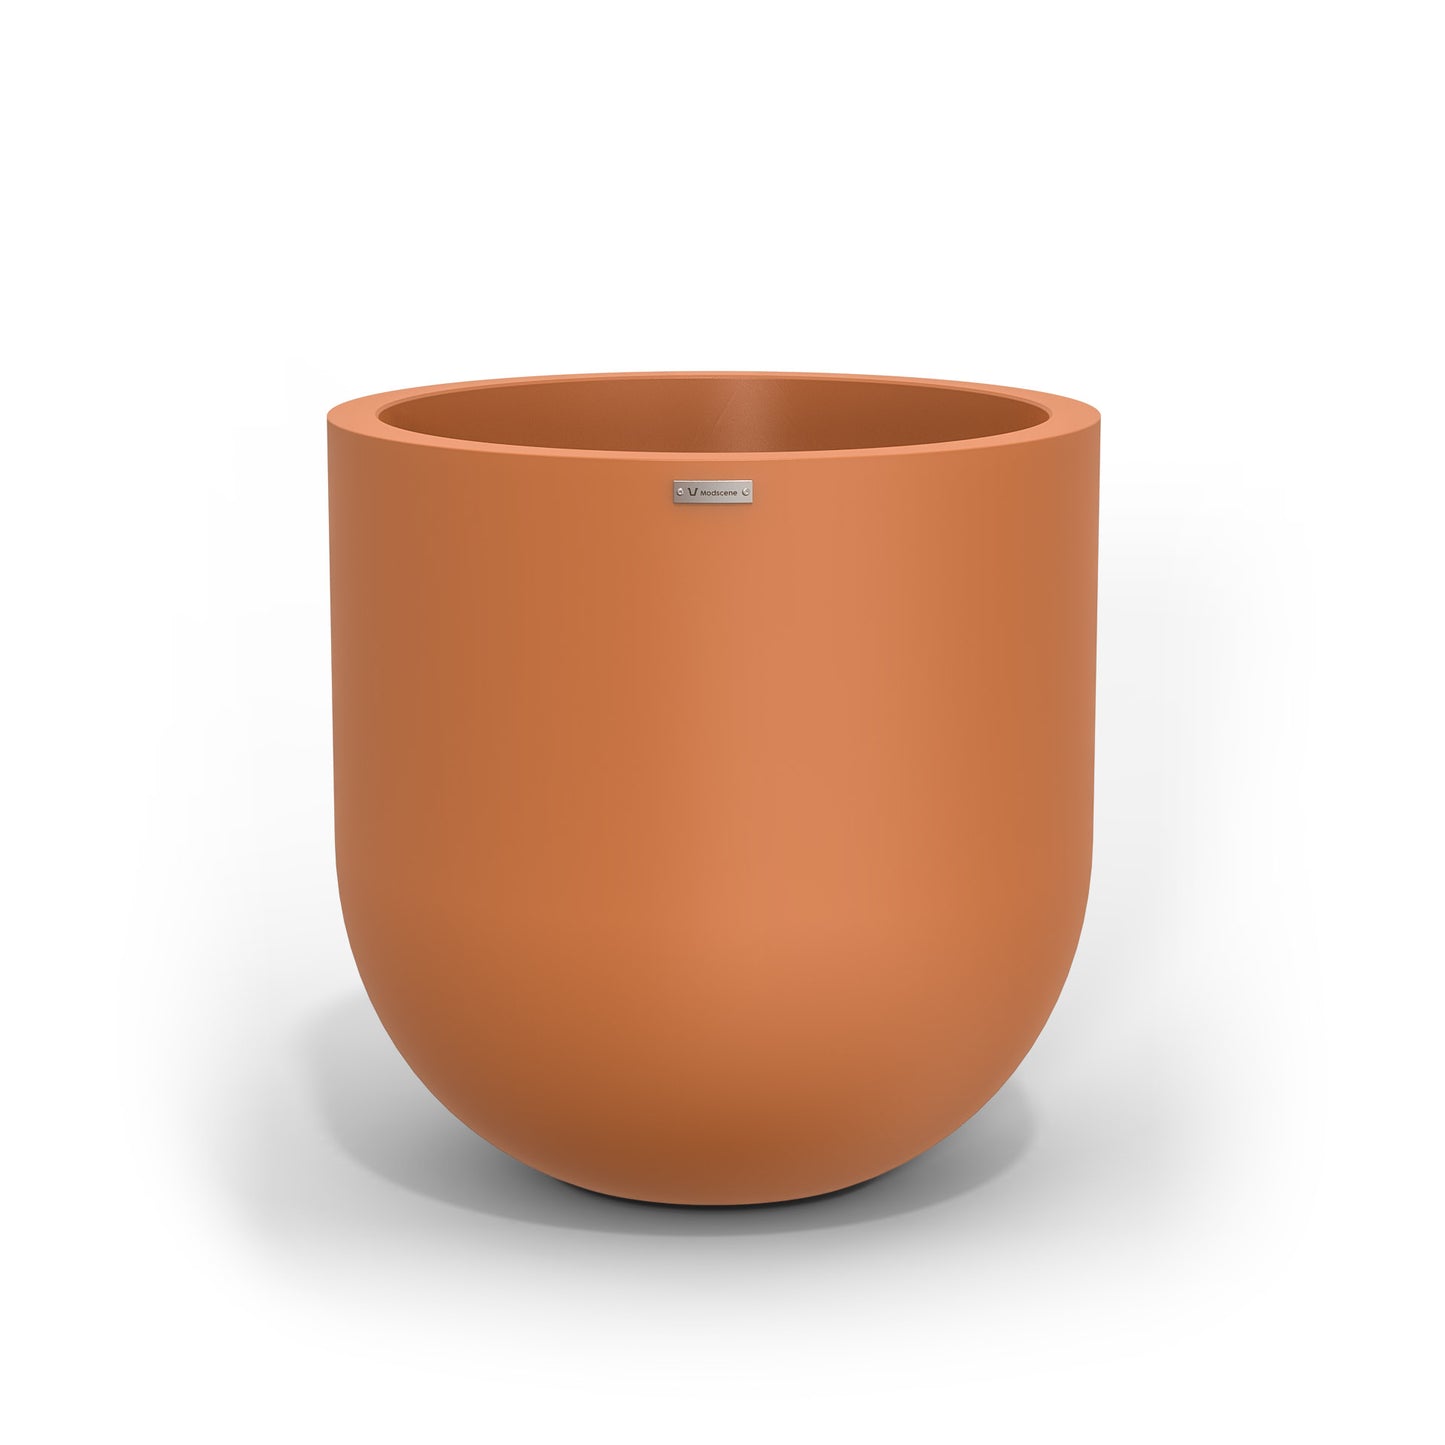 Large Modscene planter pot in a terracotta colour. Made in New Zealand